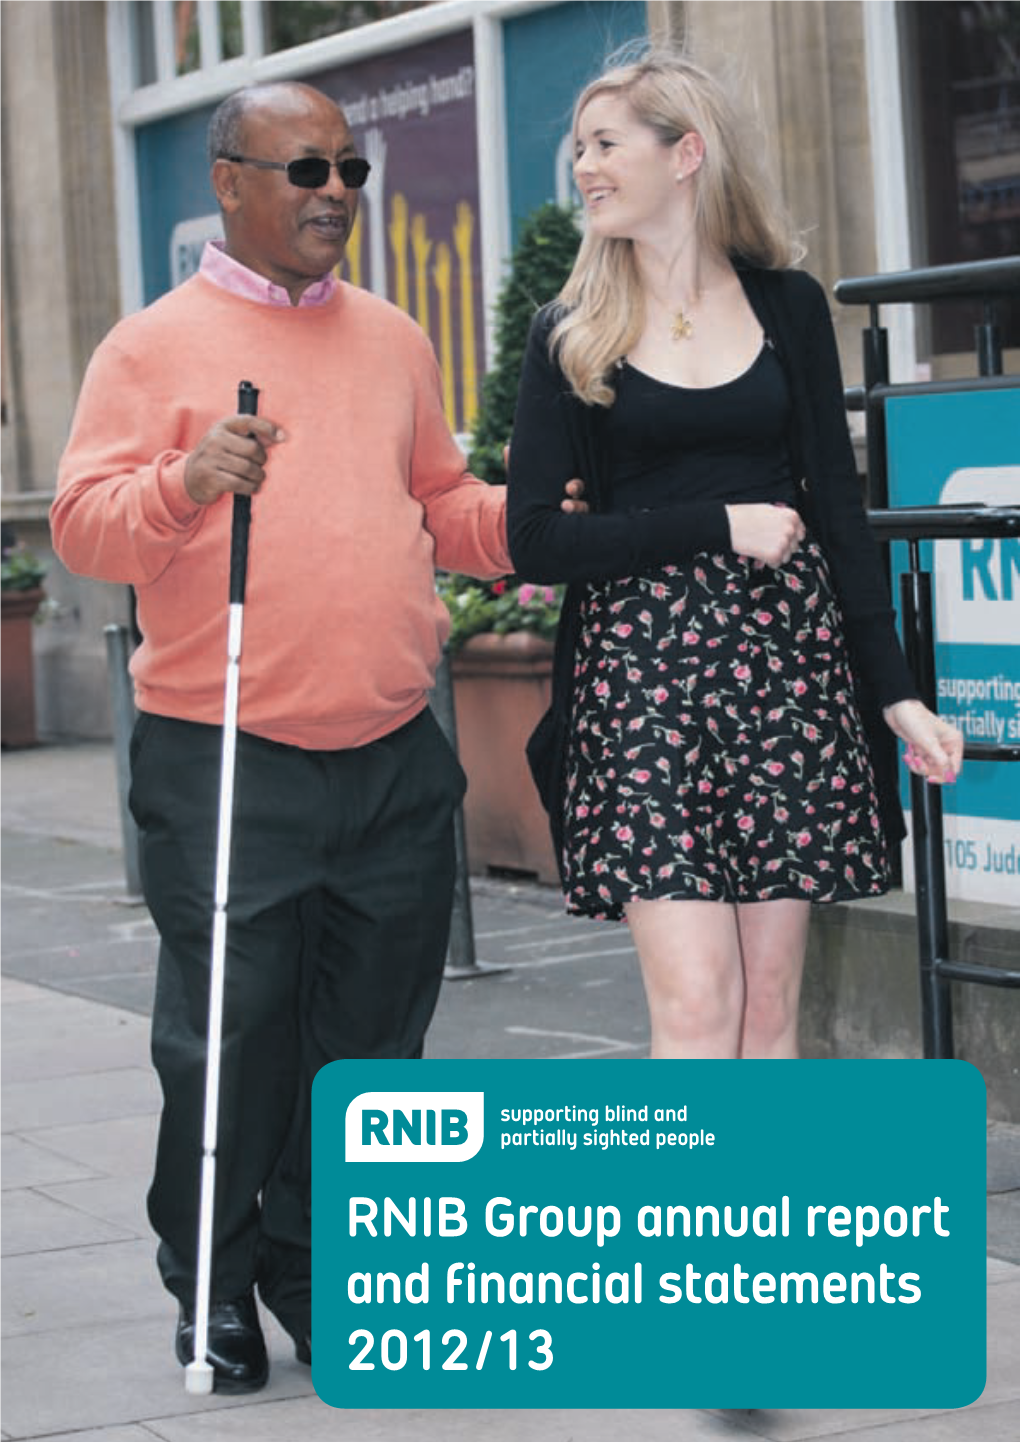 RNIB Group Annual Report and Financial Statements 2012/13